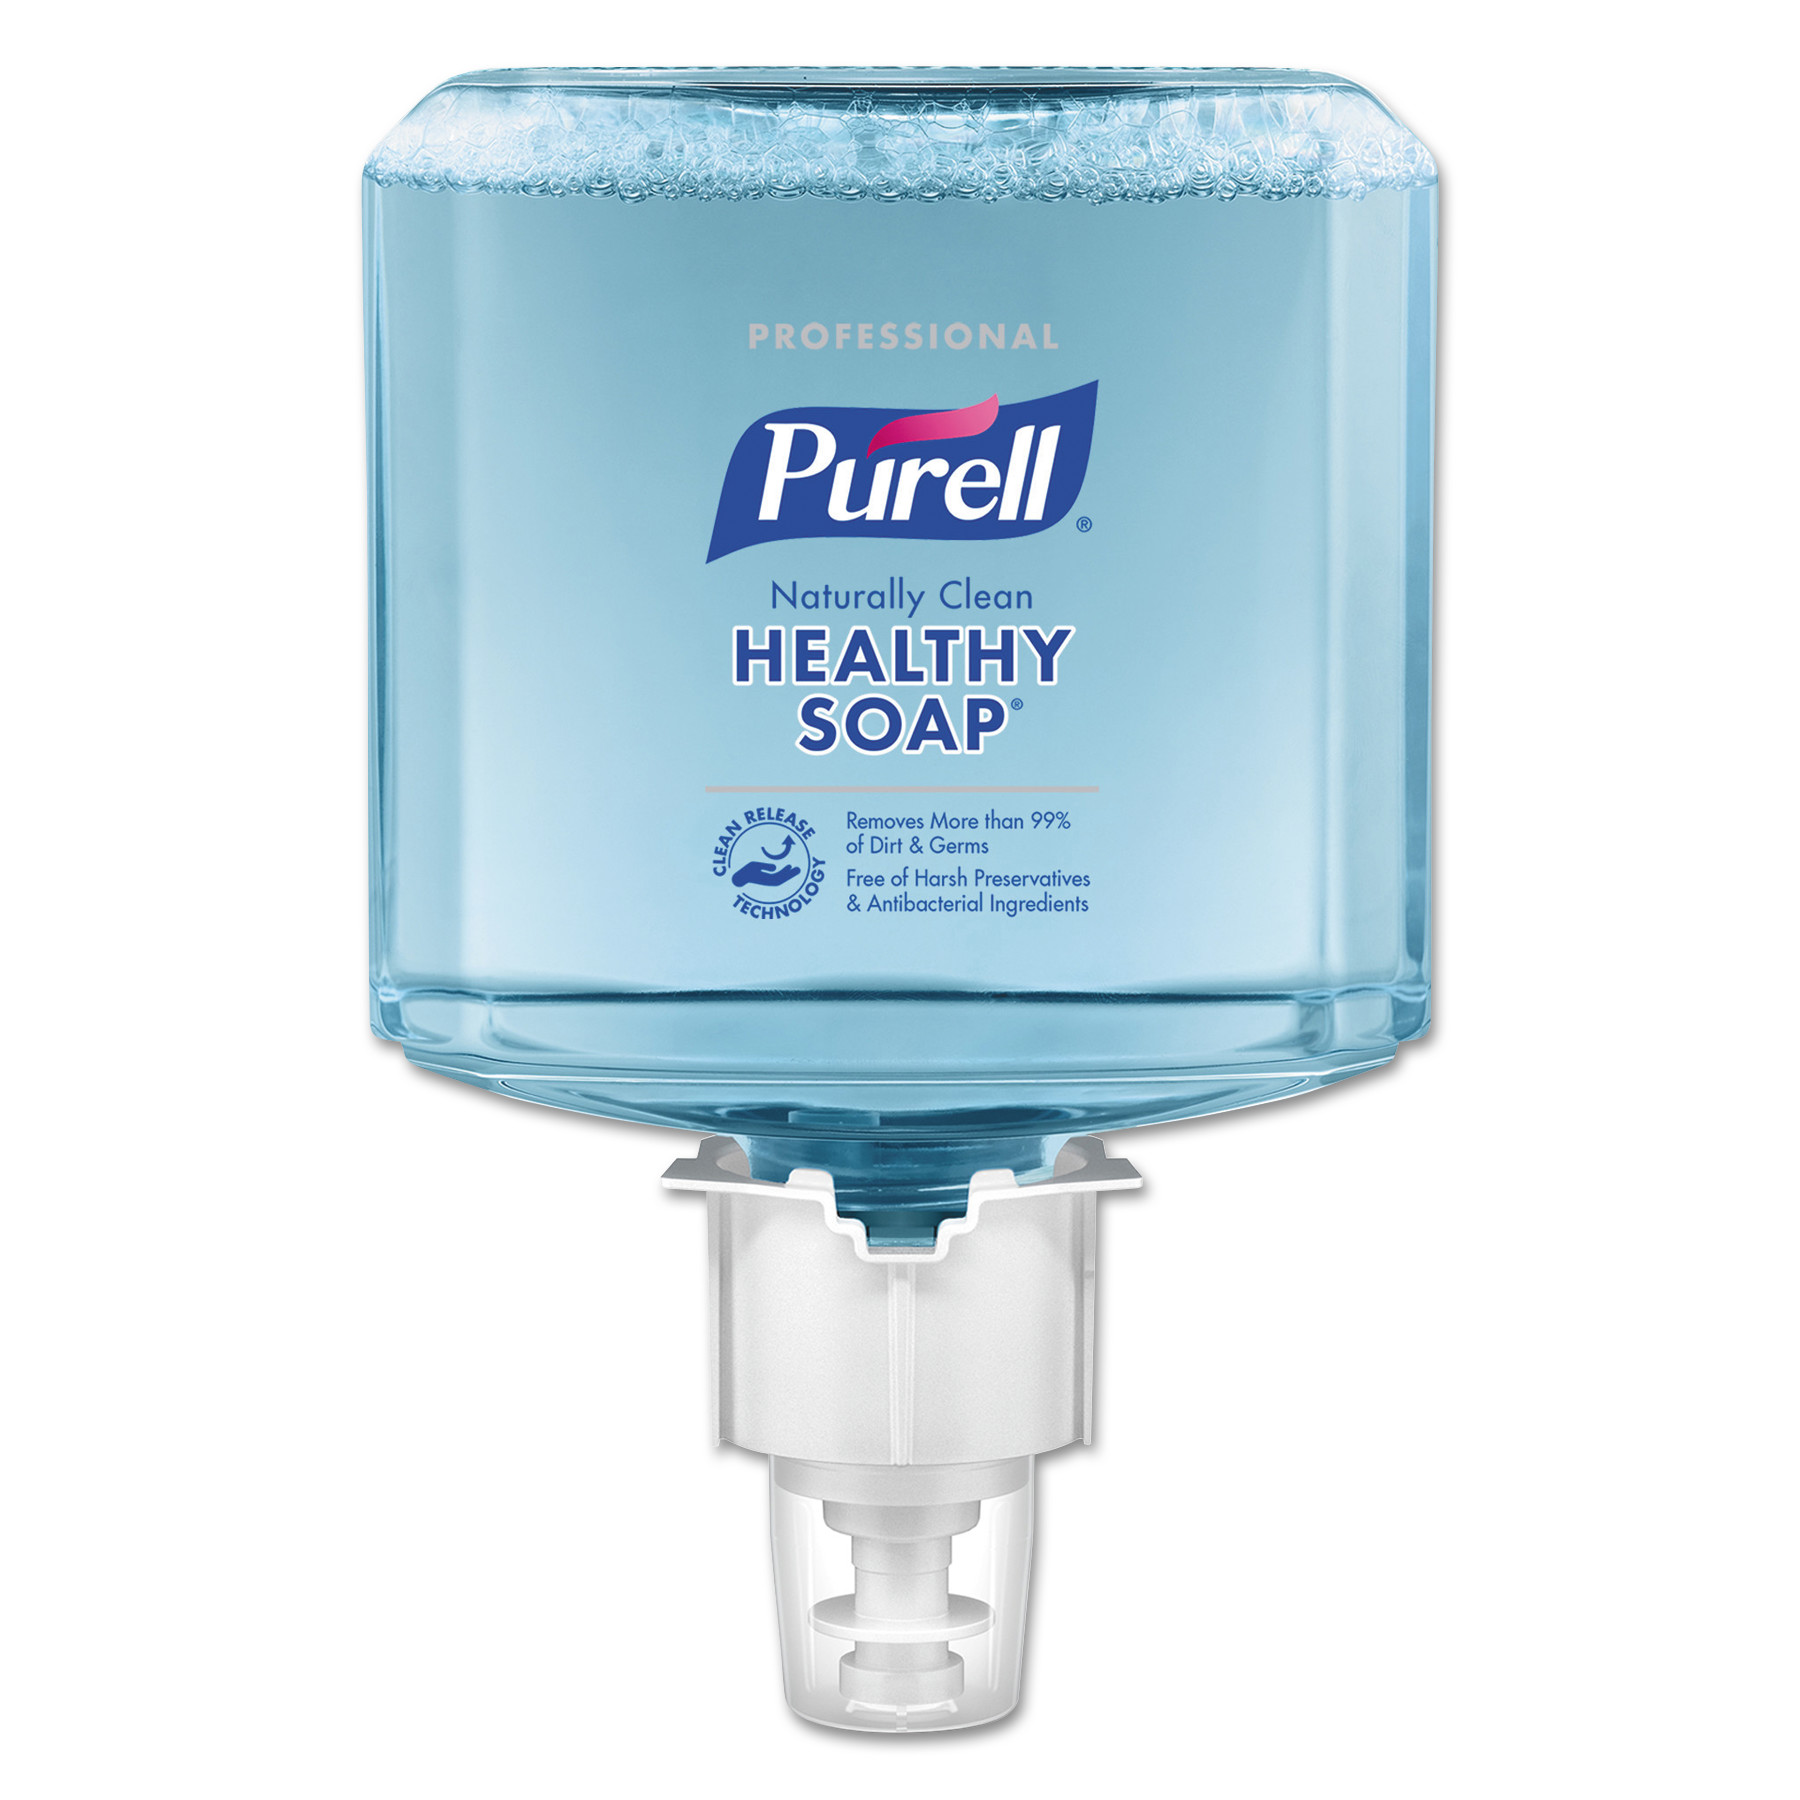  PURELL 6471-02 Professional CRT HEALTHY SOAP Naturally Clean Foam, For ES6 Dispensers, 2/CT (GOJ647102) 